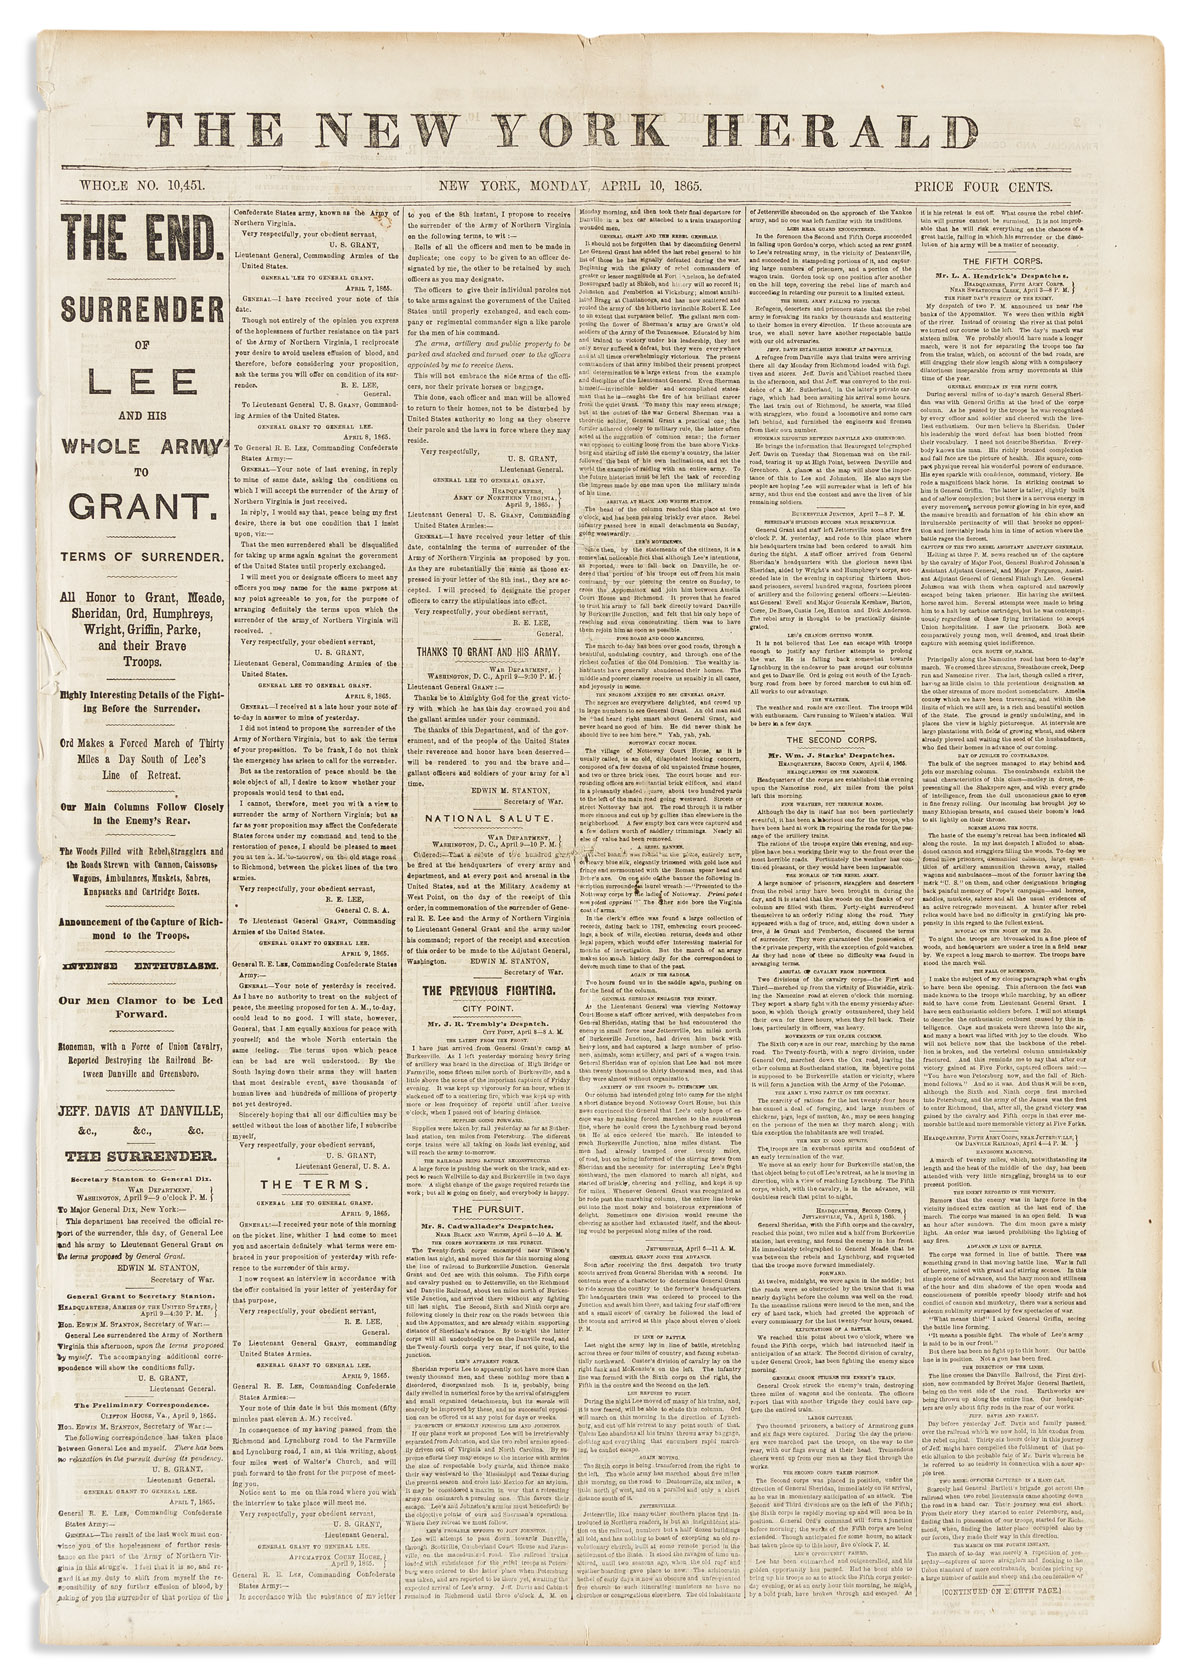 (CIVIL WAR.) Issue of the New York Herald announcing The Surrender of Lee and His Whole Army.